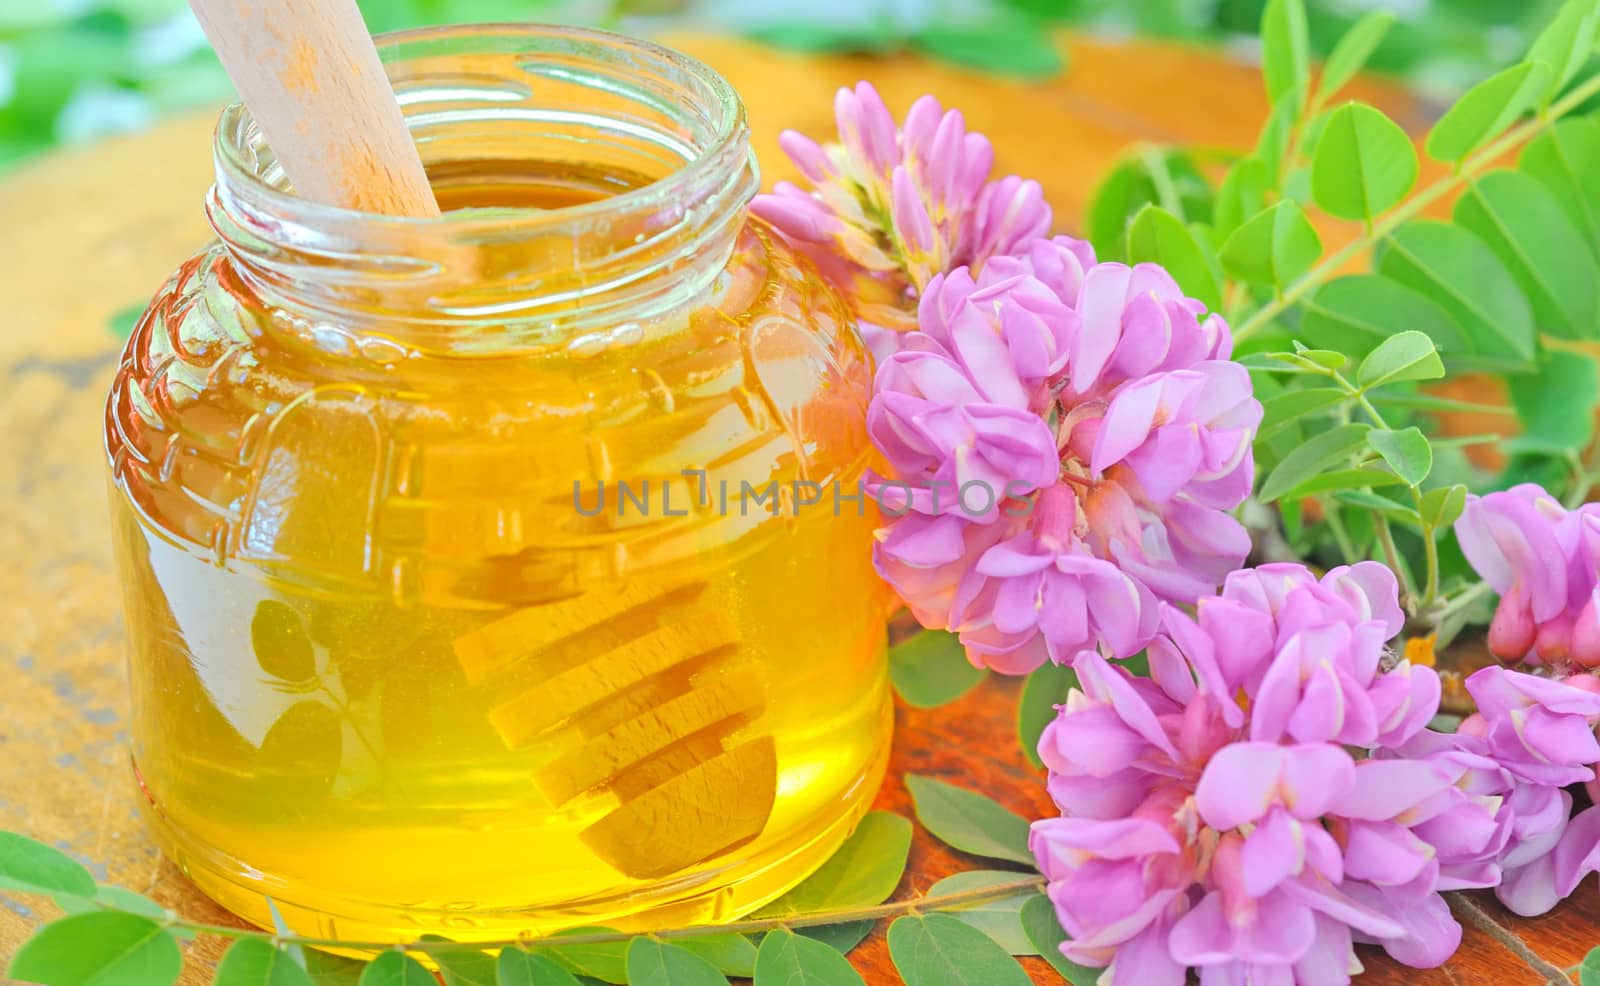 glass jar full of honey and stick with acacia pink and white flowers